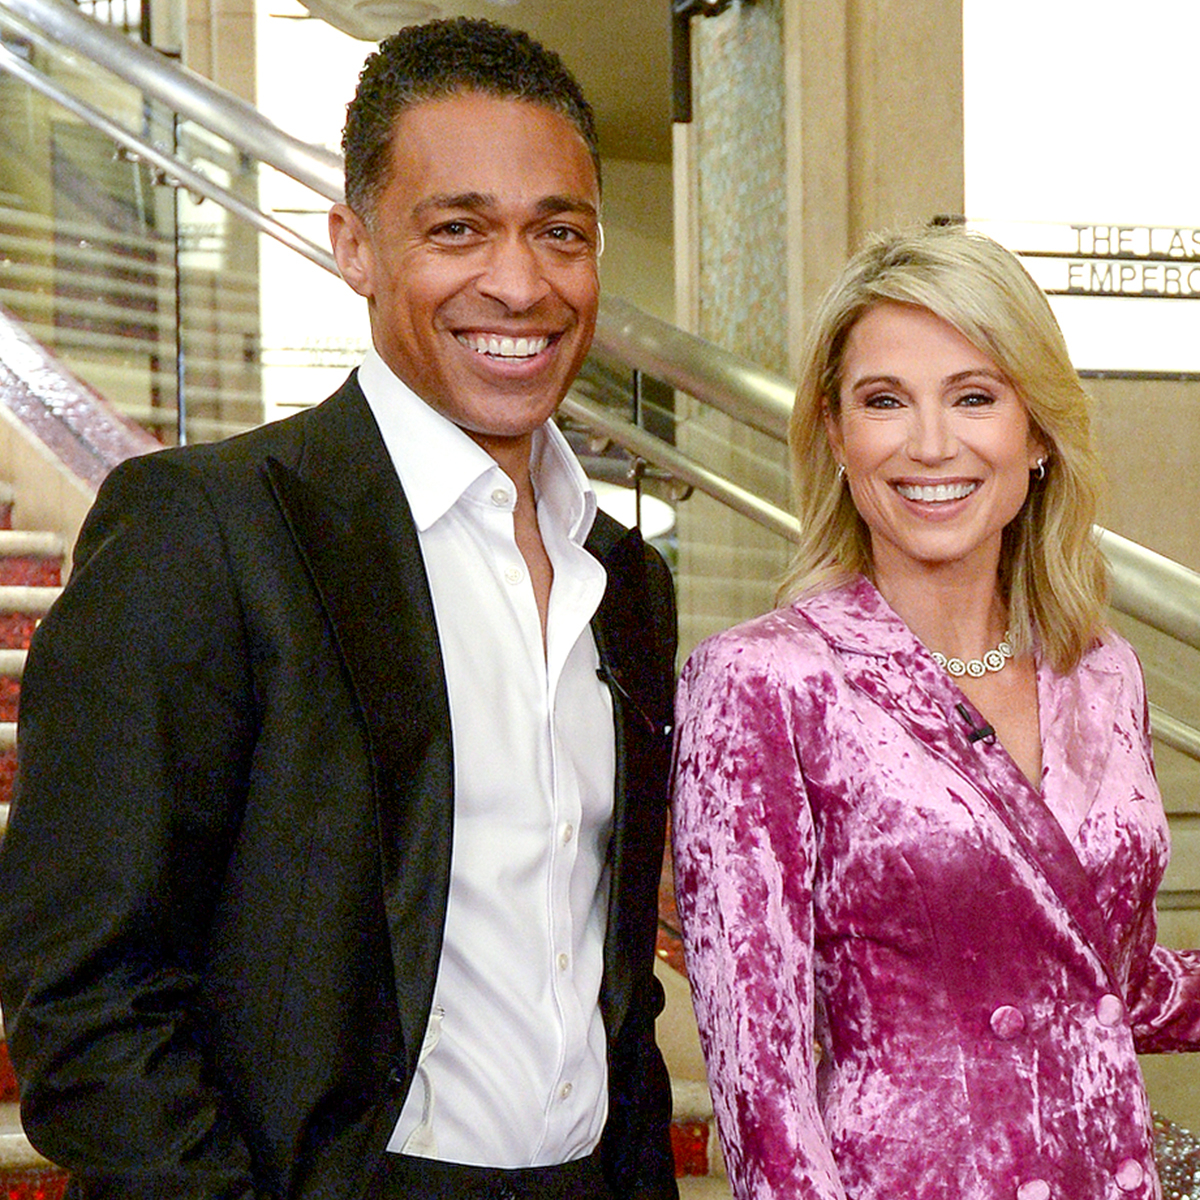 A Complete Guide to the GMA3 Drama Sparked by Amy Robach and T.J. Holmes’ Romance – E! Online